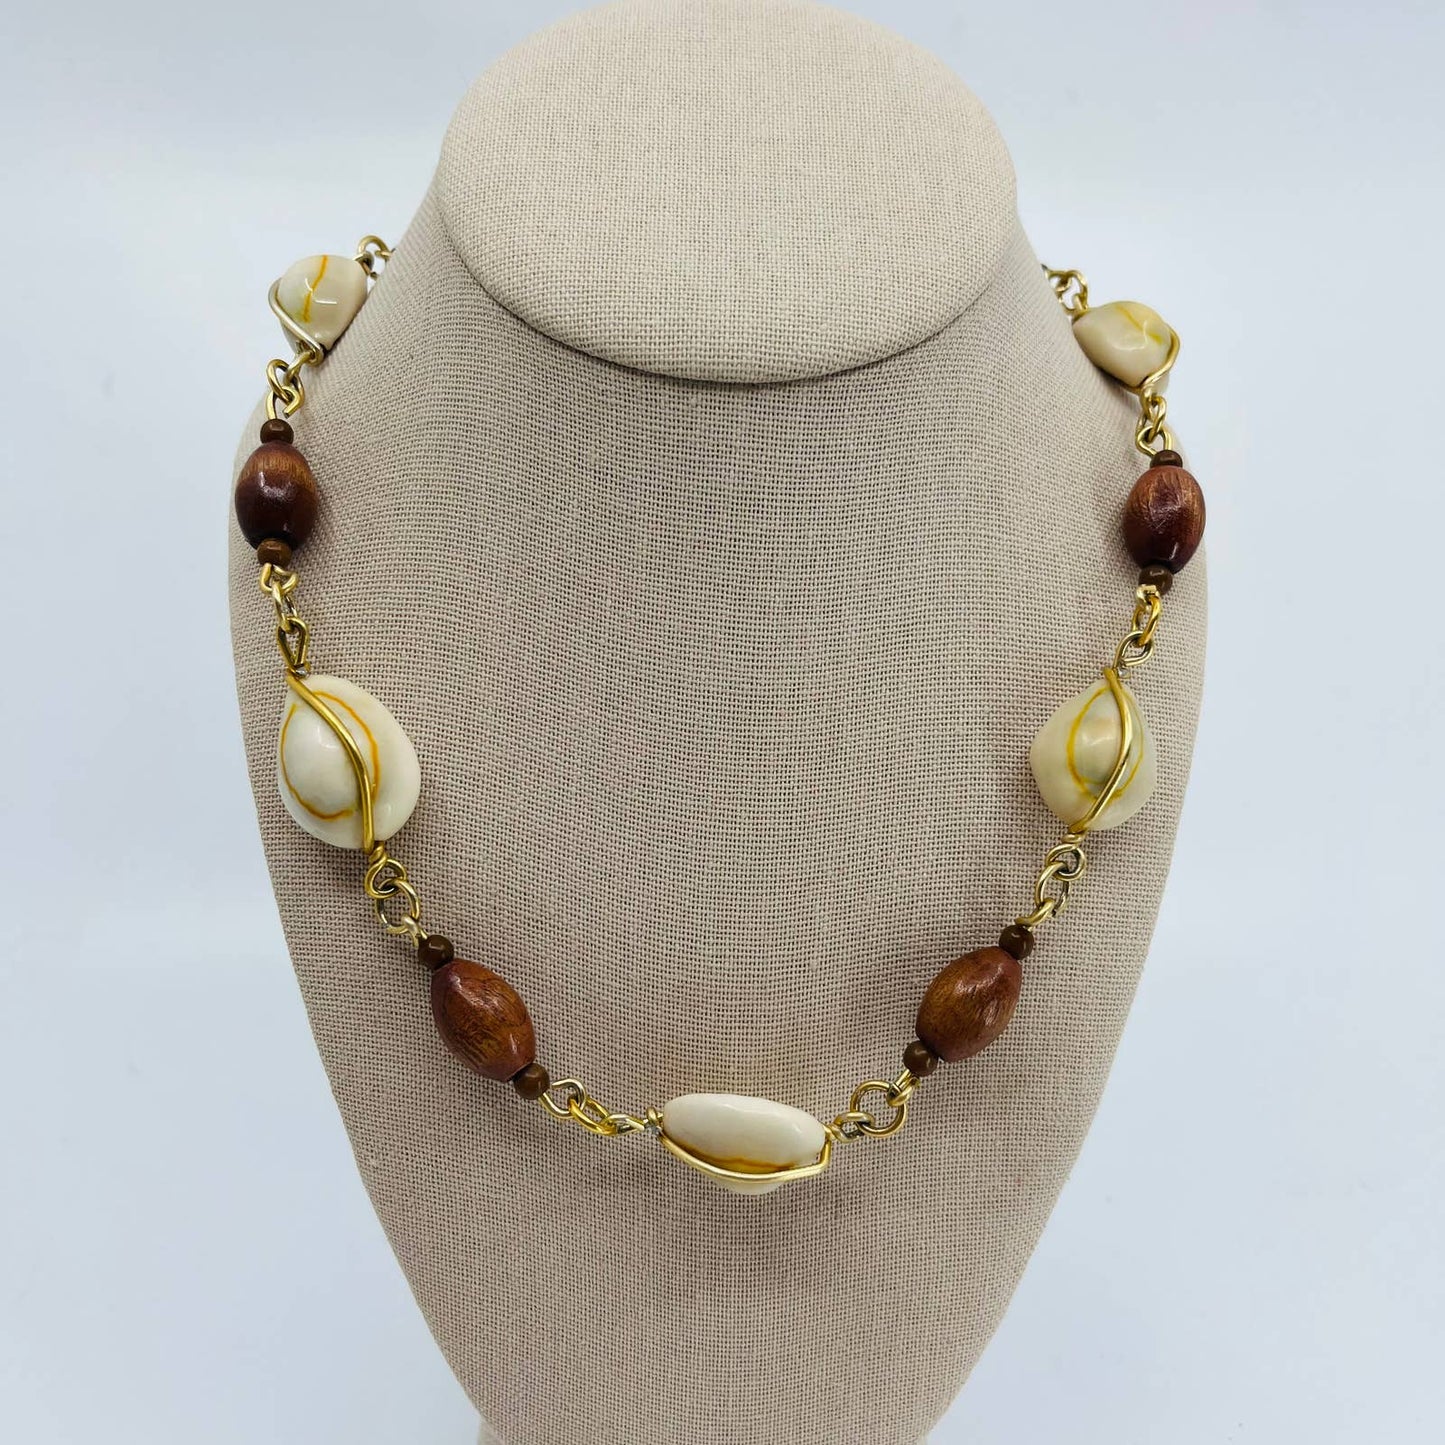 Vintage Boho Wood Bead and Conch Shell Gold Tone Necklace SB2